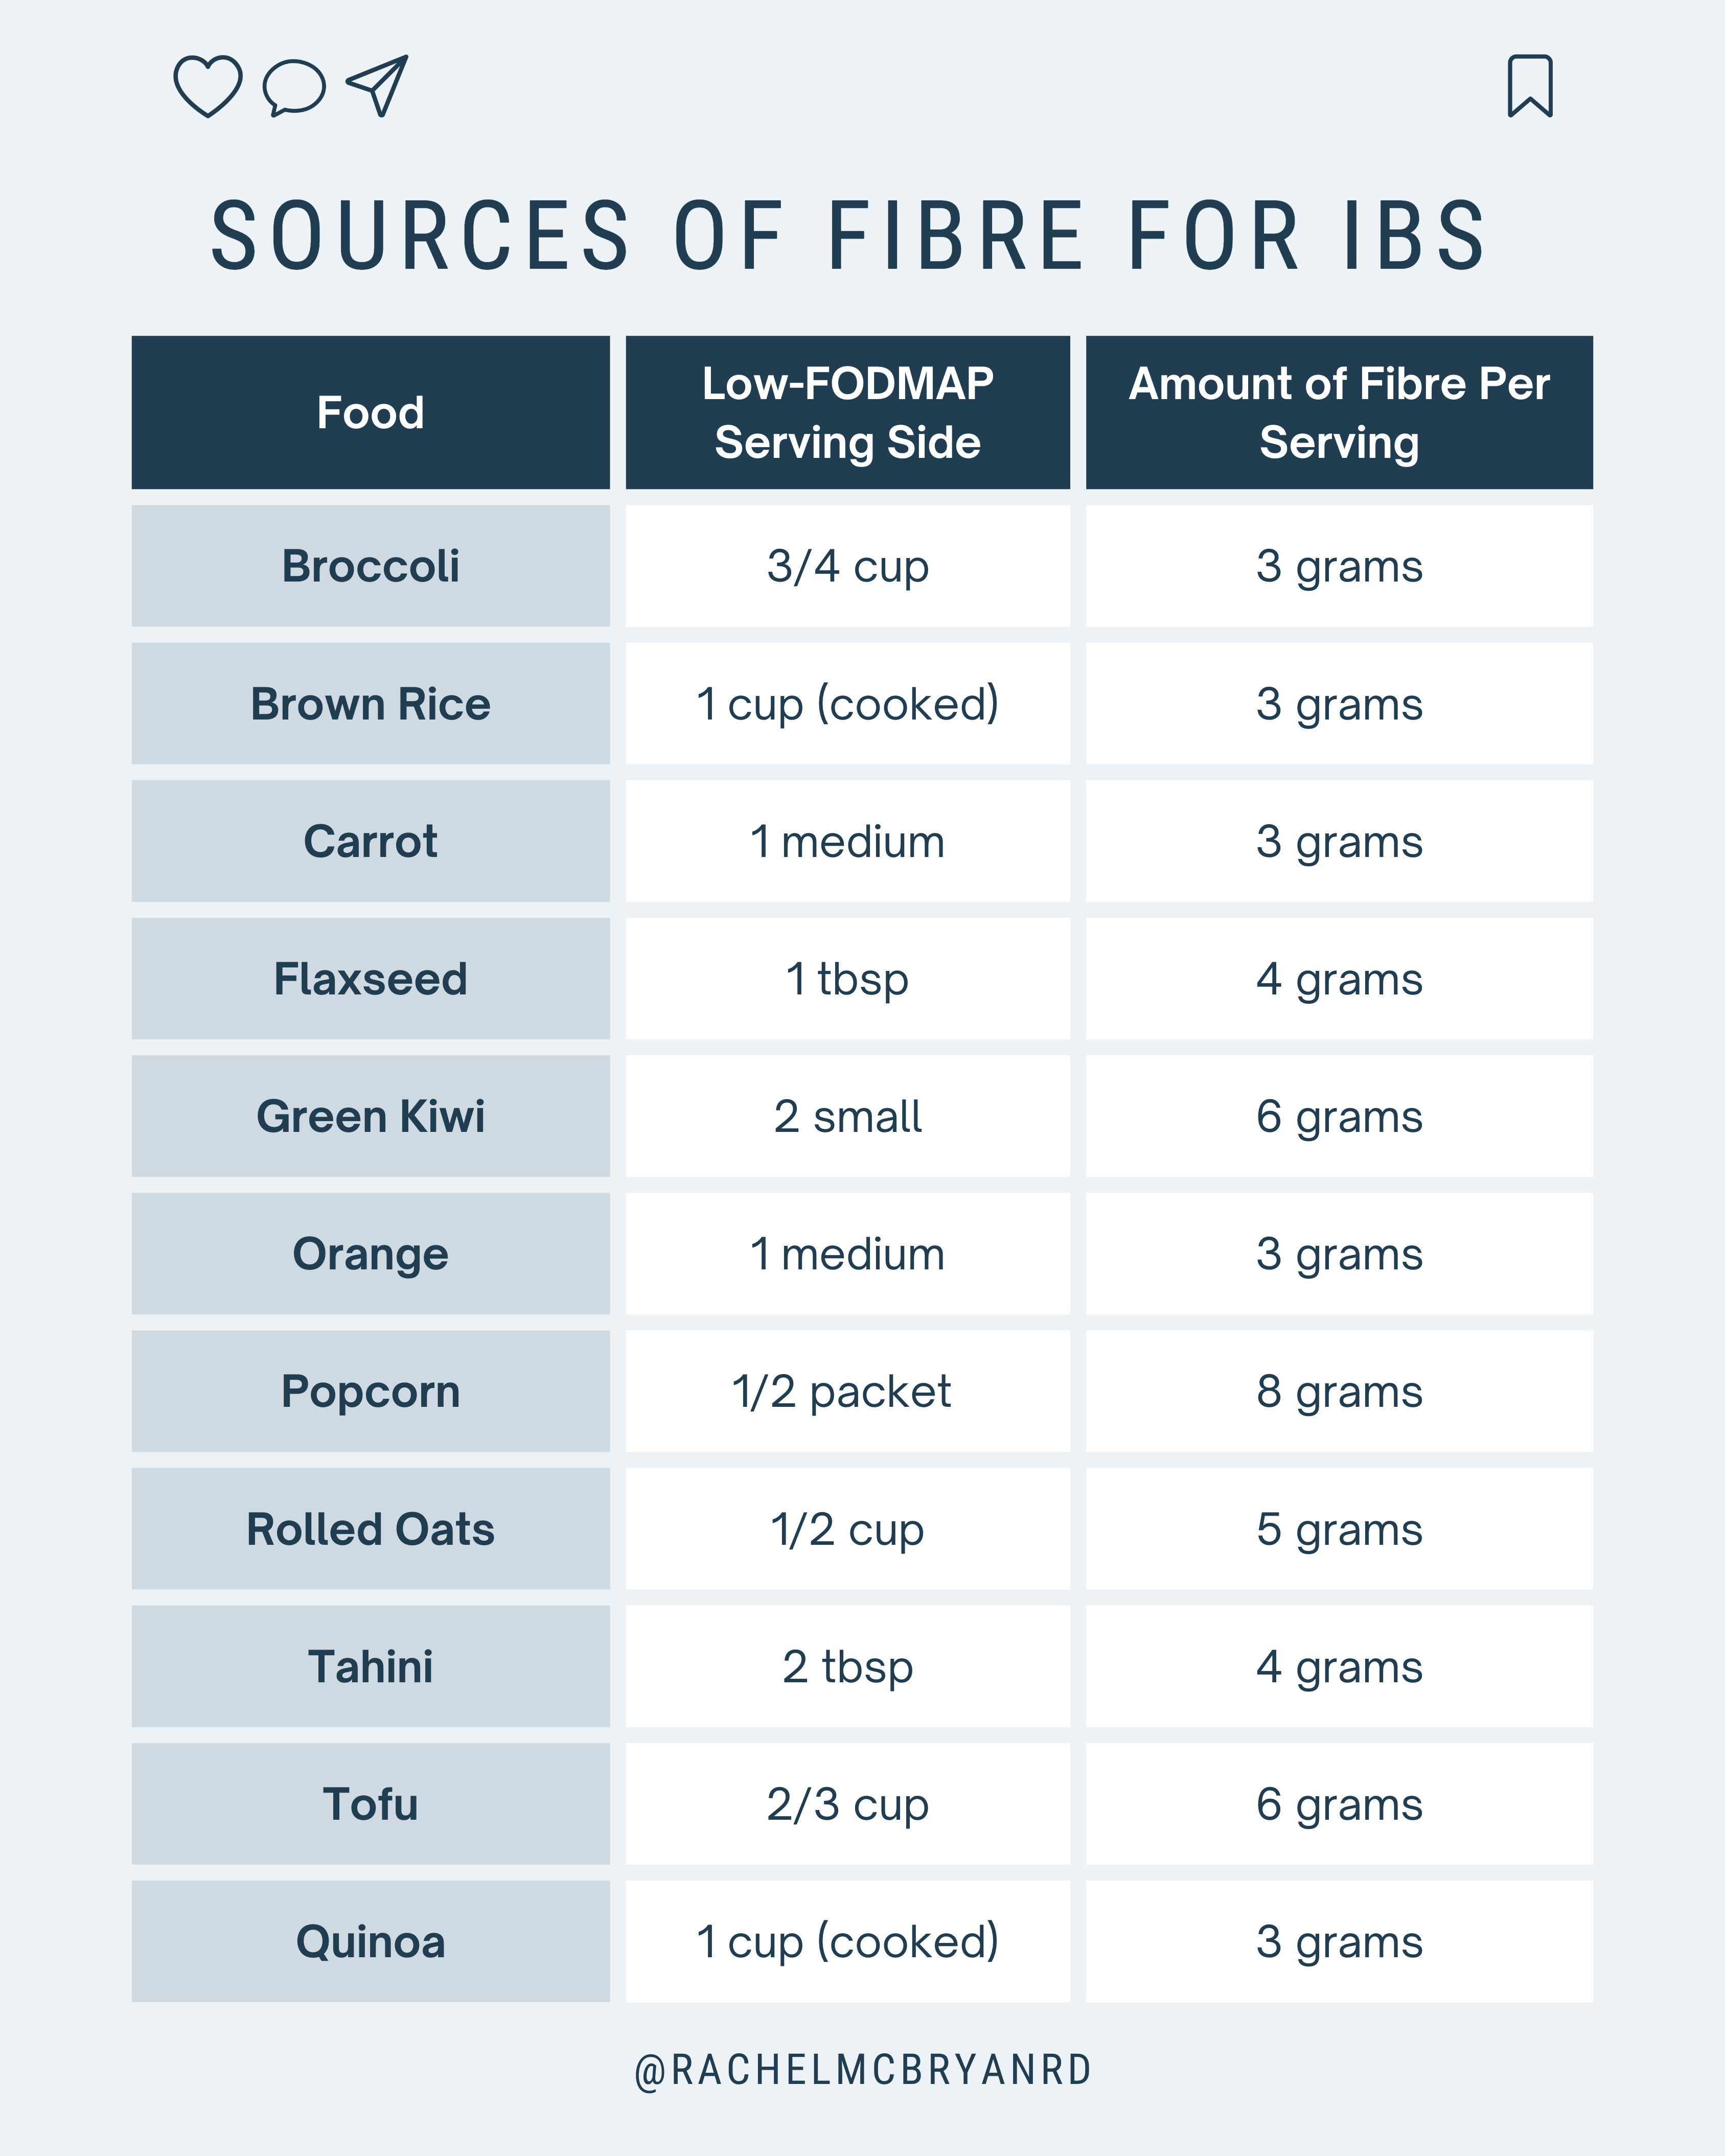 Sources of Fibre for IBS